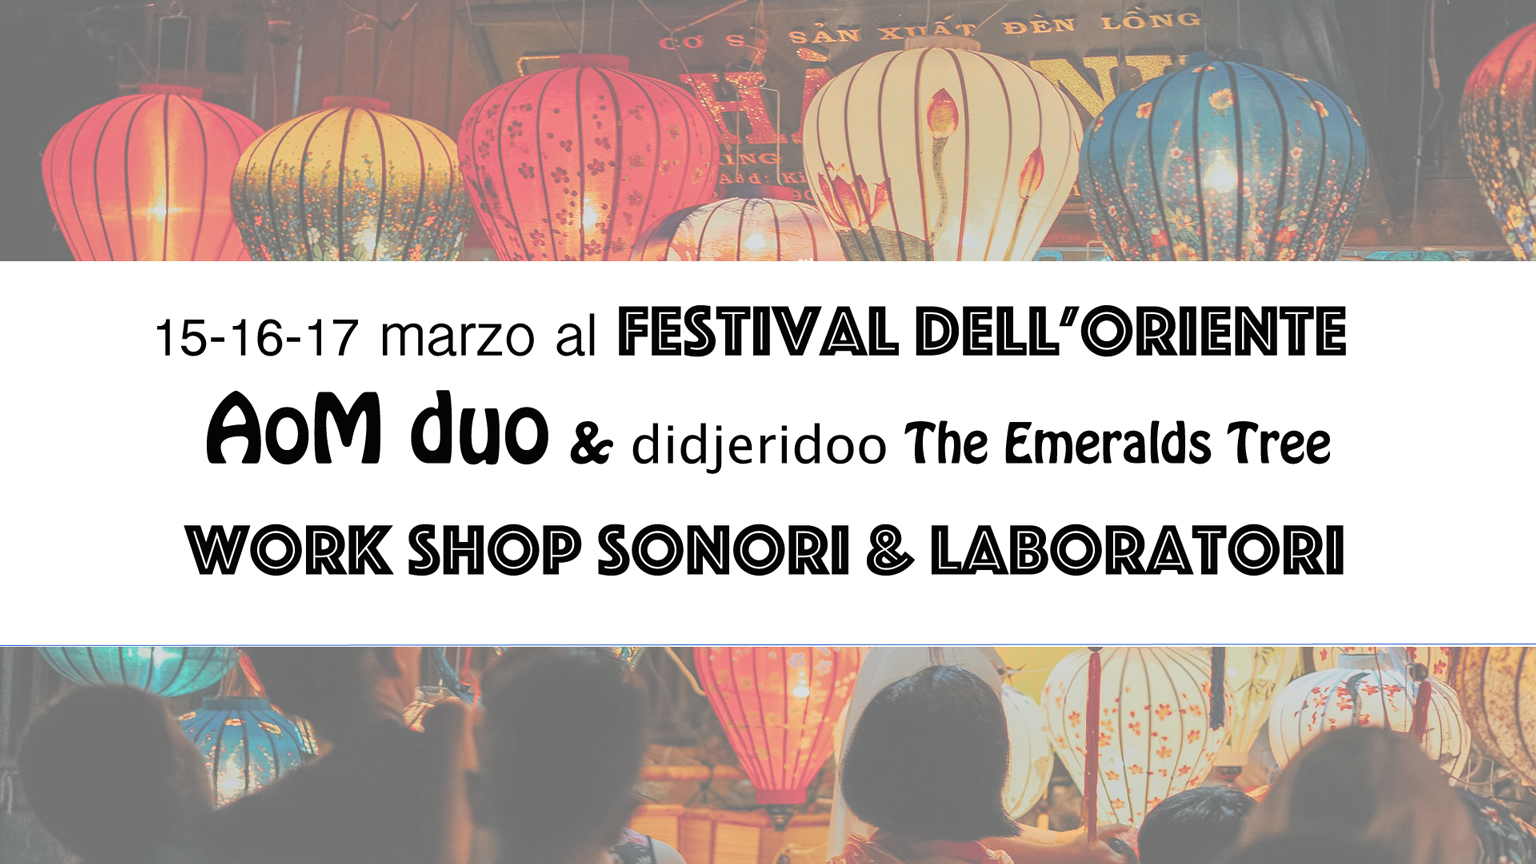 From 15 to 17 March Didjeridoo ad the ORIENTAL FESTIVAL Turin